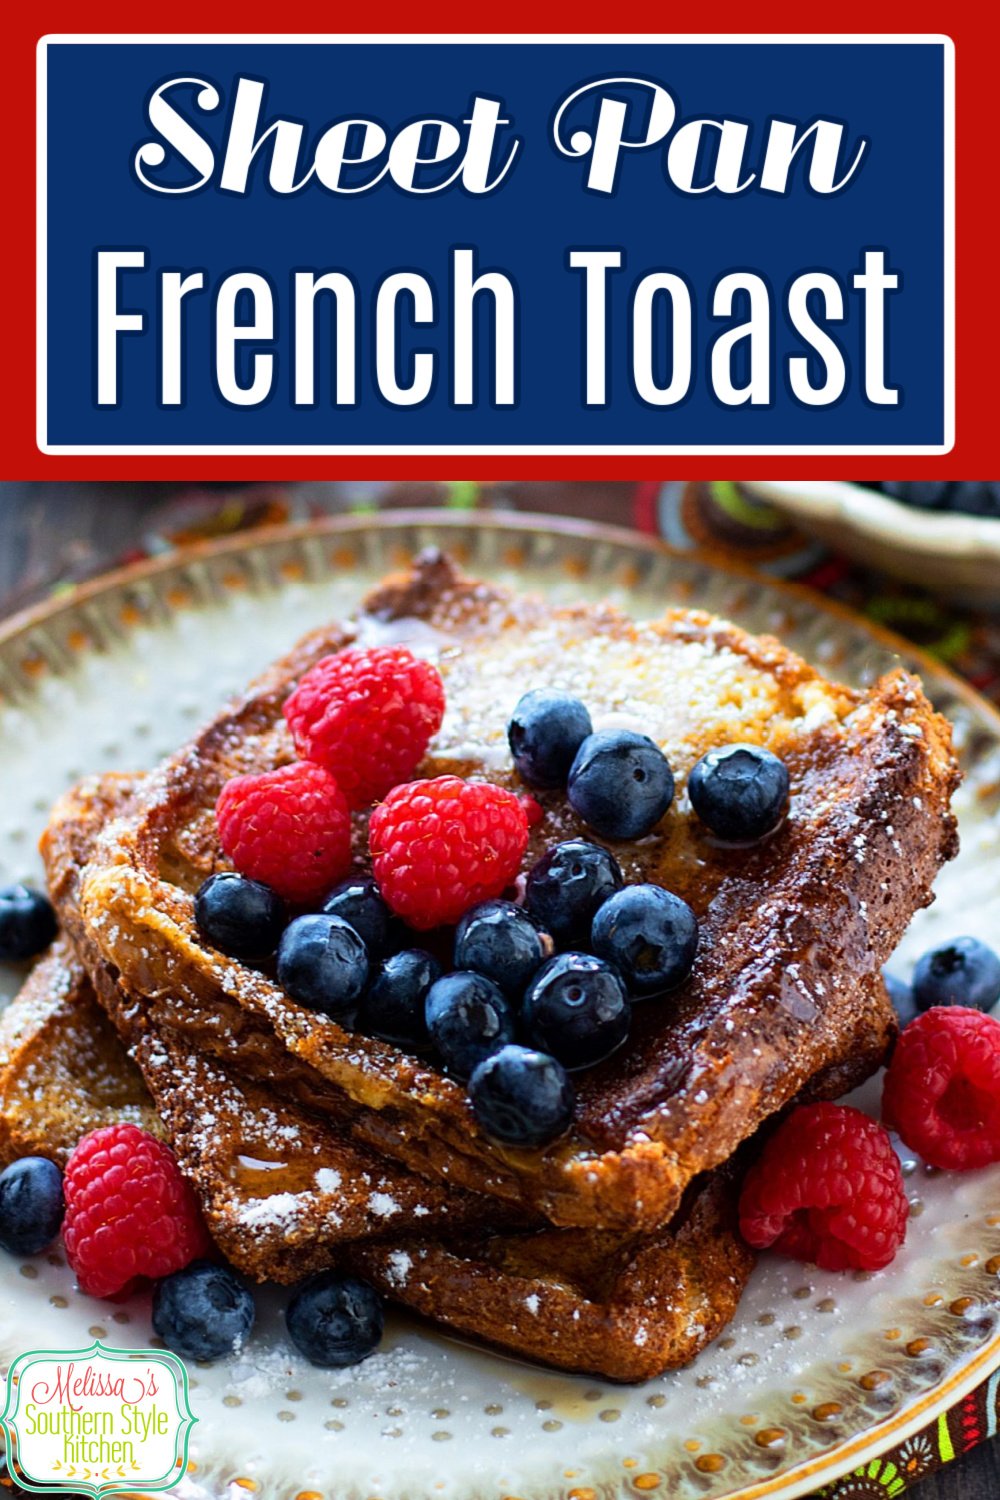 Sheet Pan French Toast is incredibly delicious with the bonus of making enough for everyone to enjoy in one fell swoop #frenchtoast #sheetpanfrenchtoast #frenchtoastrecipes #texastoast #brunch #breakfast #sheetpanrecipes #southernrecipes via @melissasssk